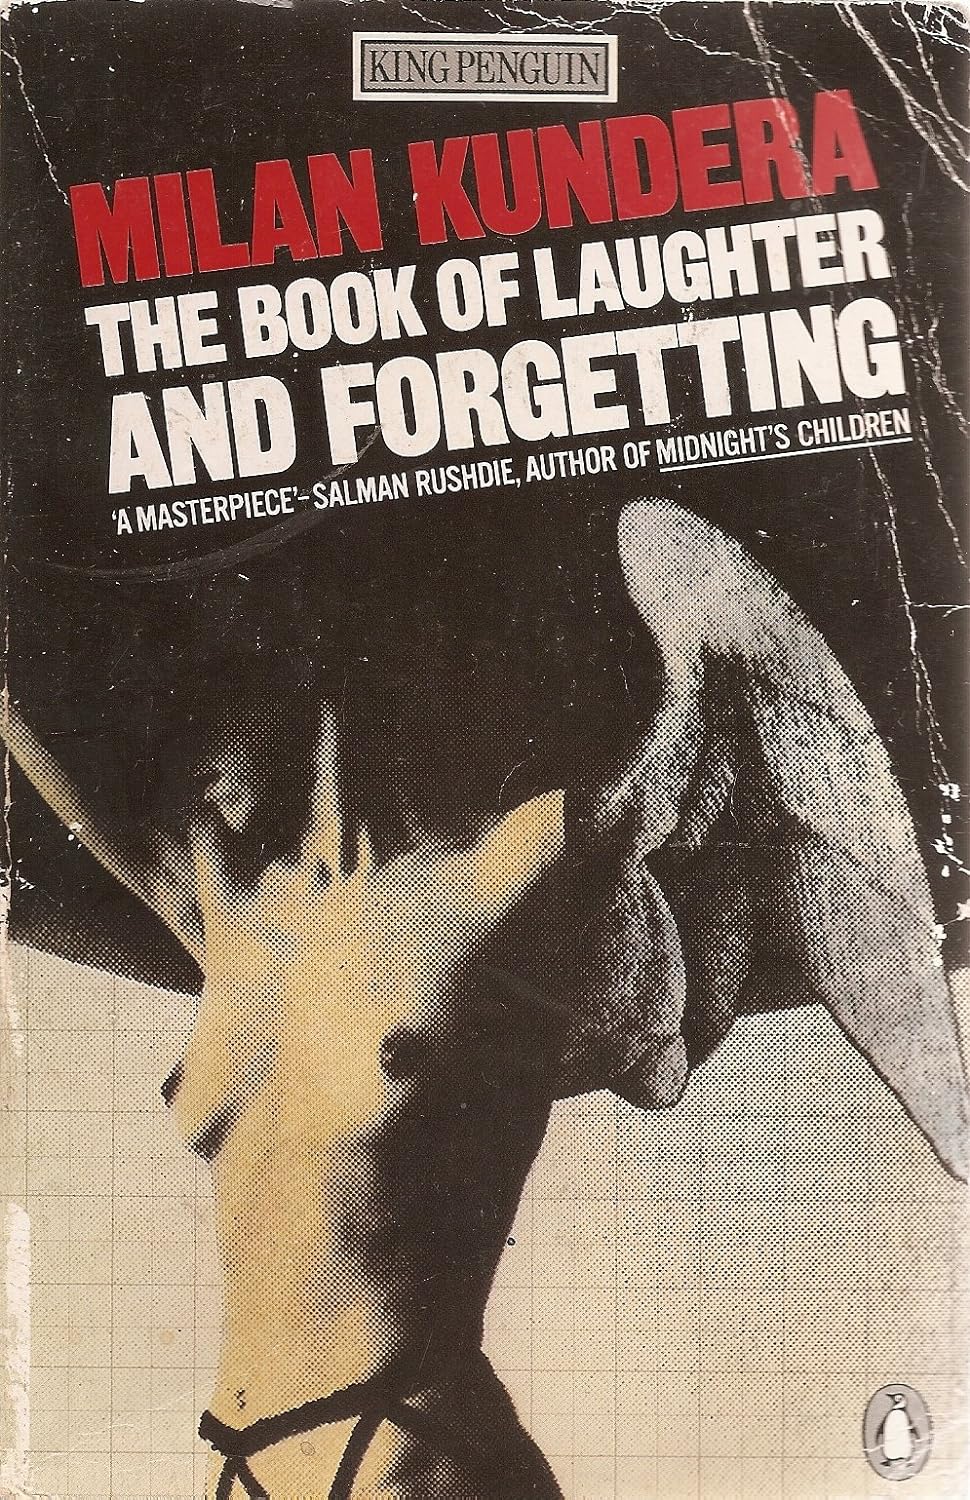 Milan Kundera: The Book of Laughter and Forgetting (Paperback, 1983, King Penguin)